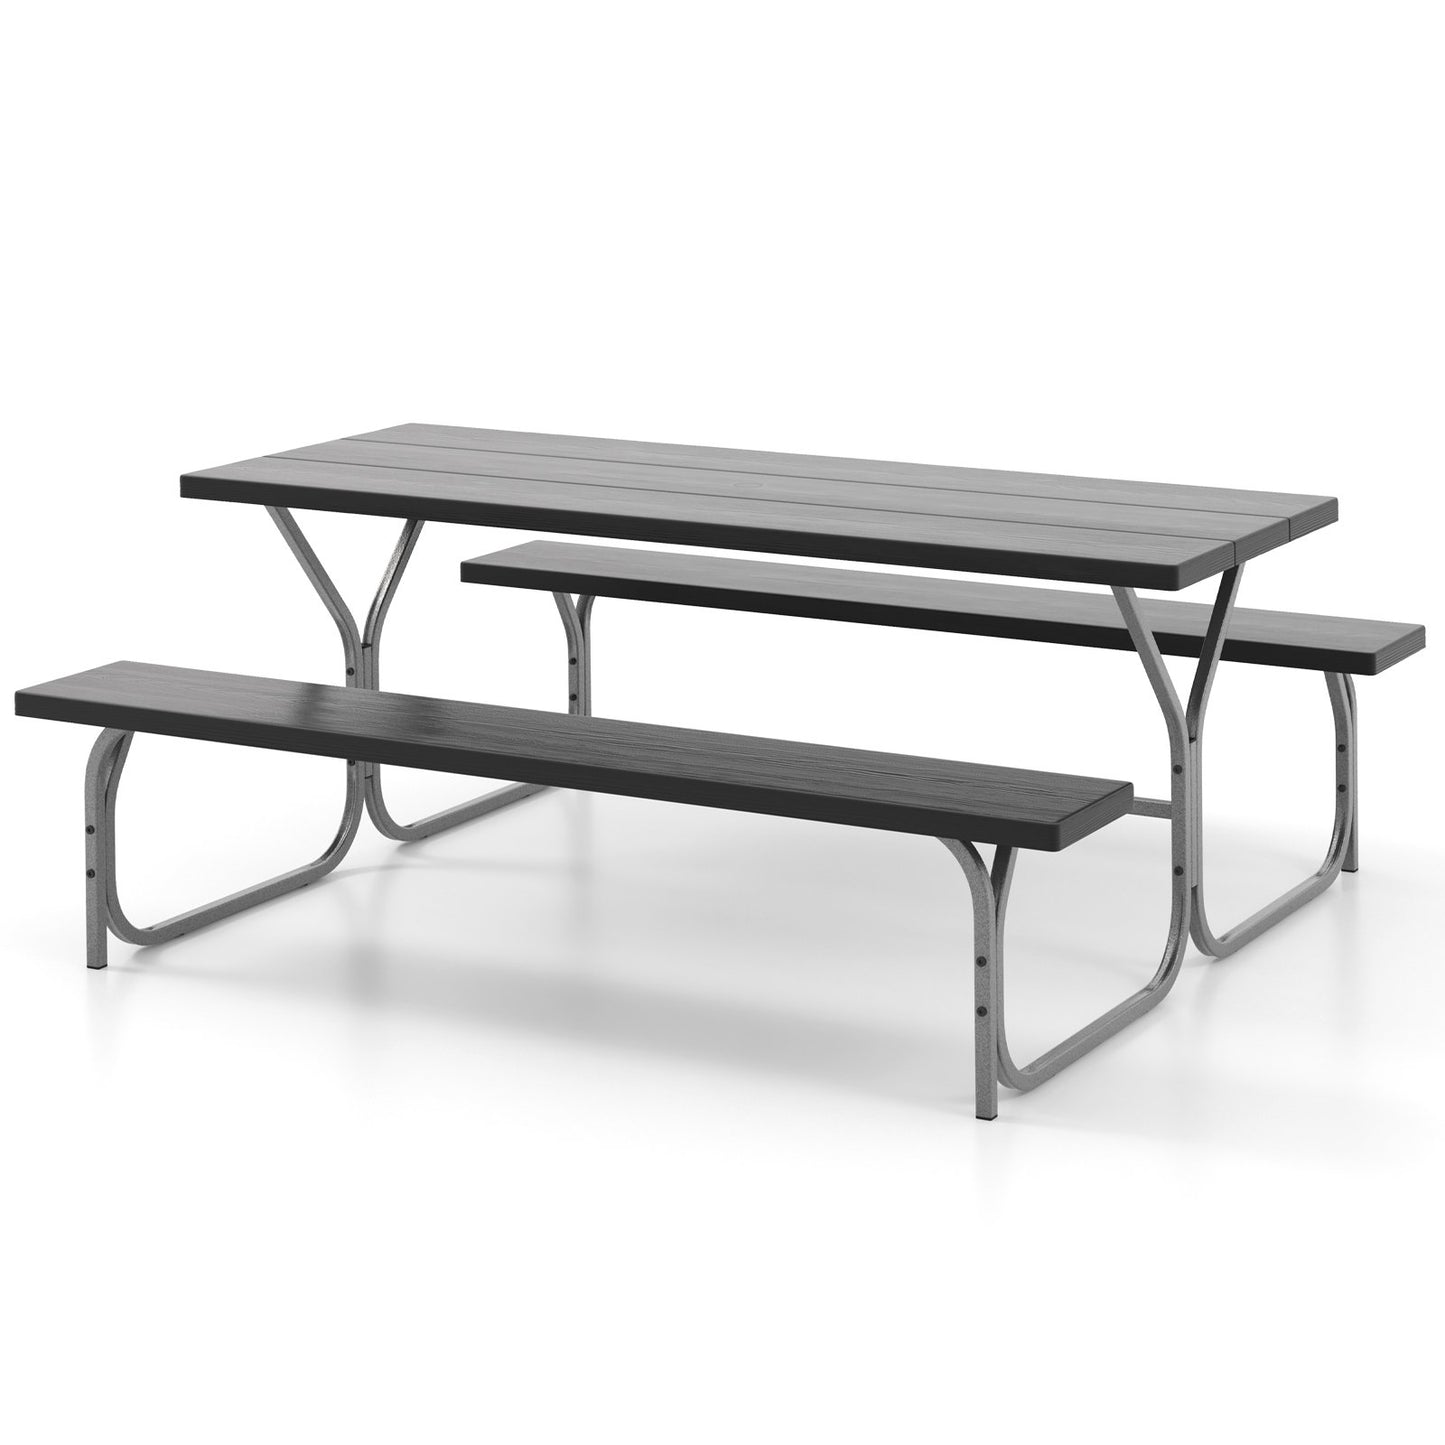 6 Feet Picnic Table Bench Set with HDPE Tabletop for 8 Person, Black